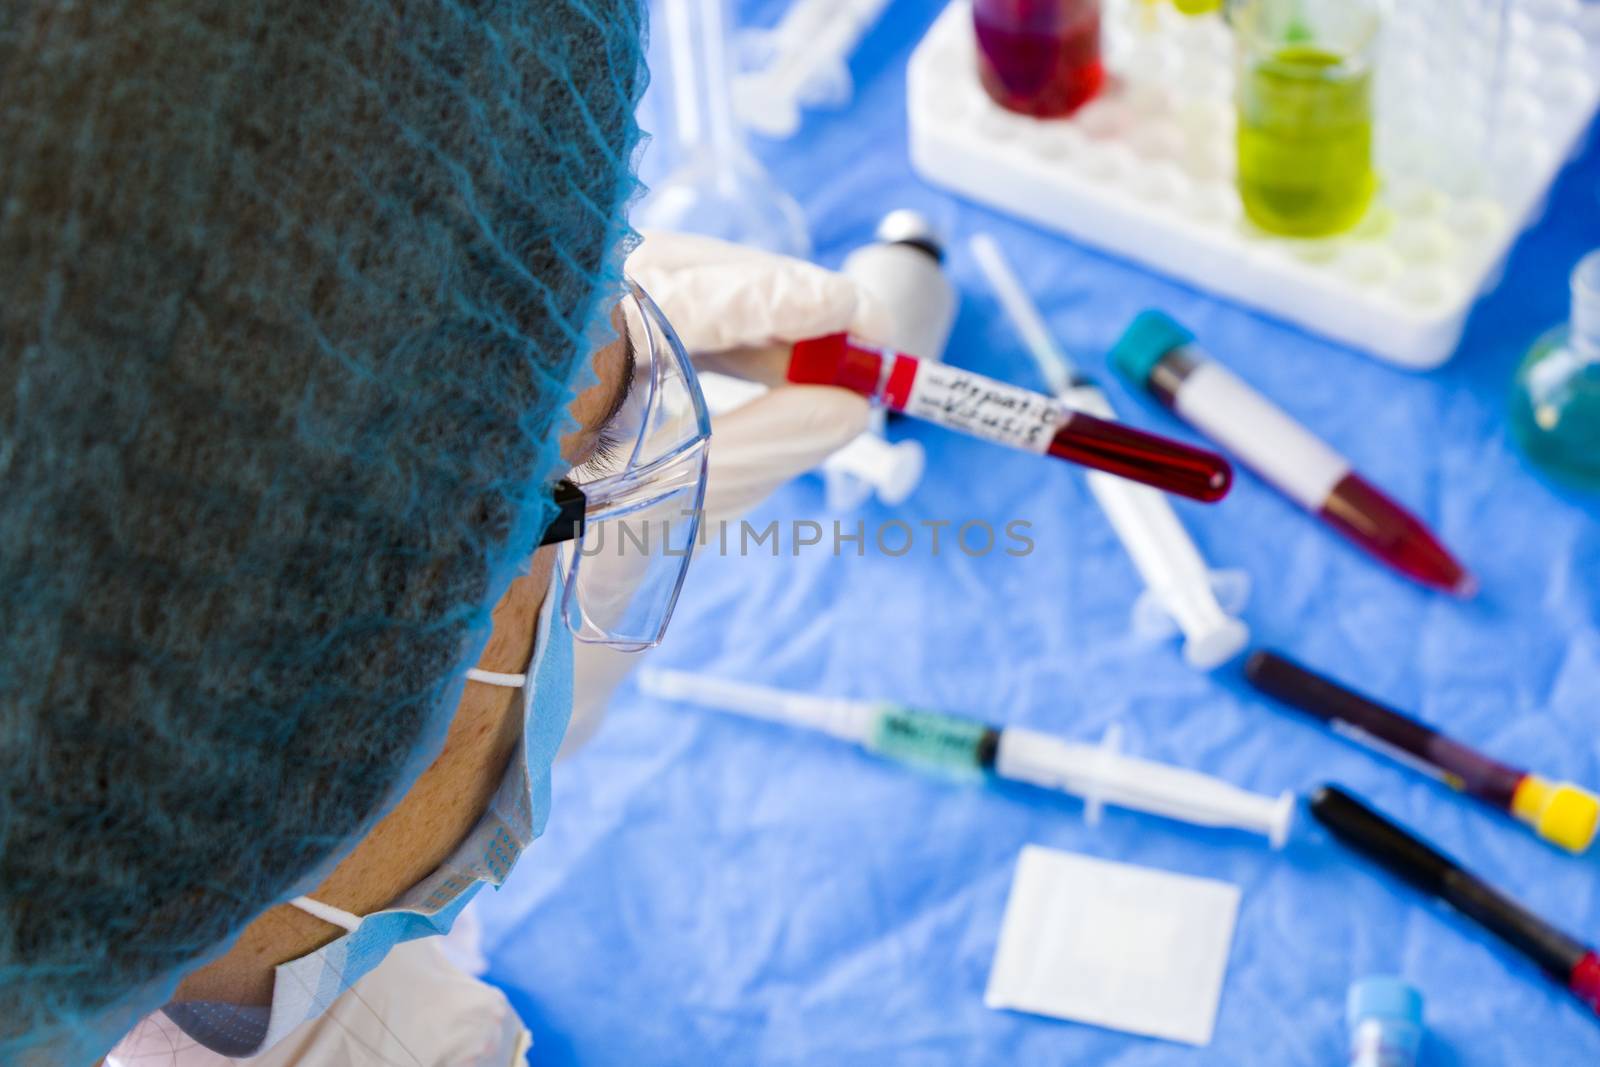 Hepatic blood test tube sample in doctors hand, doctors head with mask and glasses